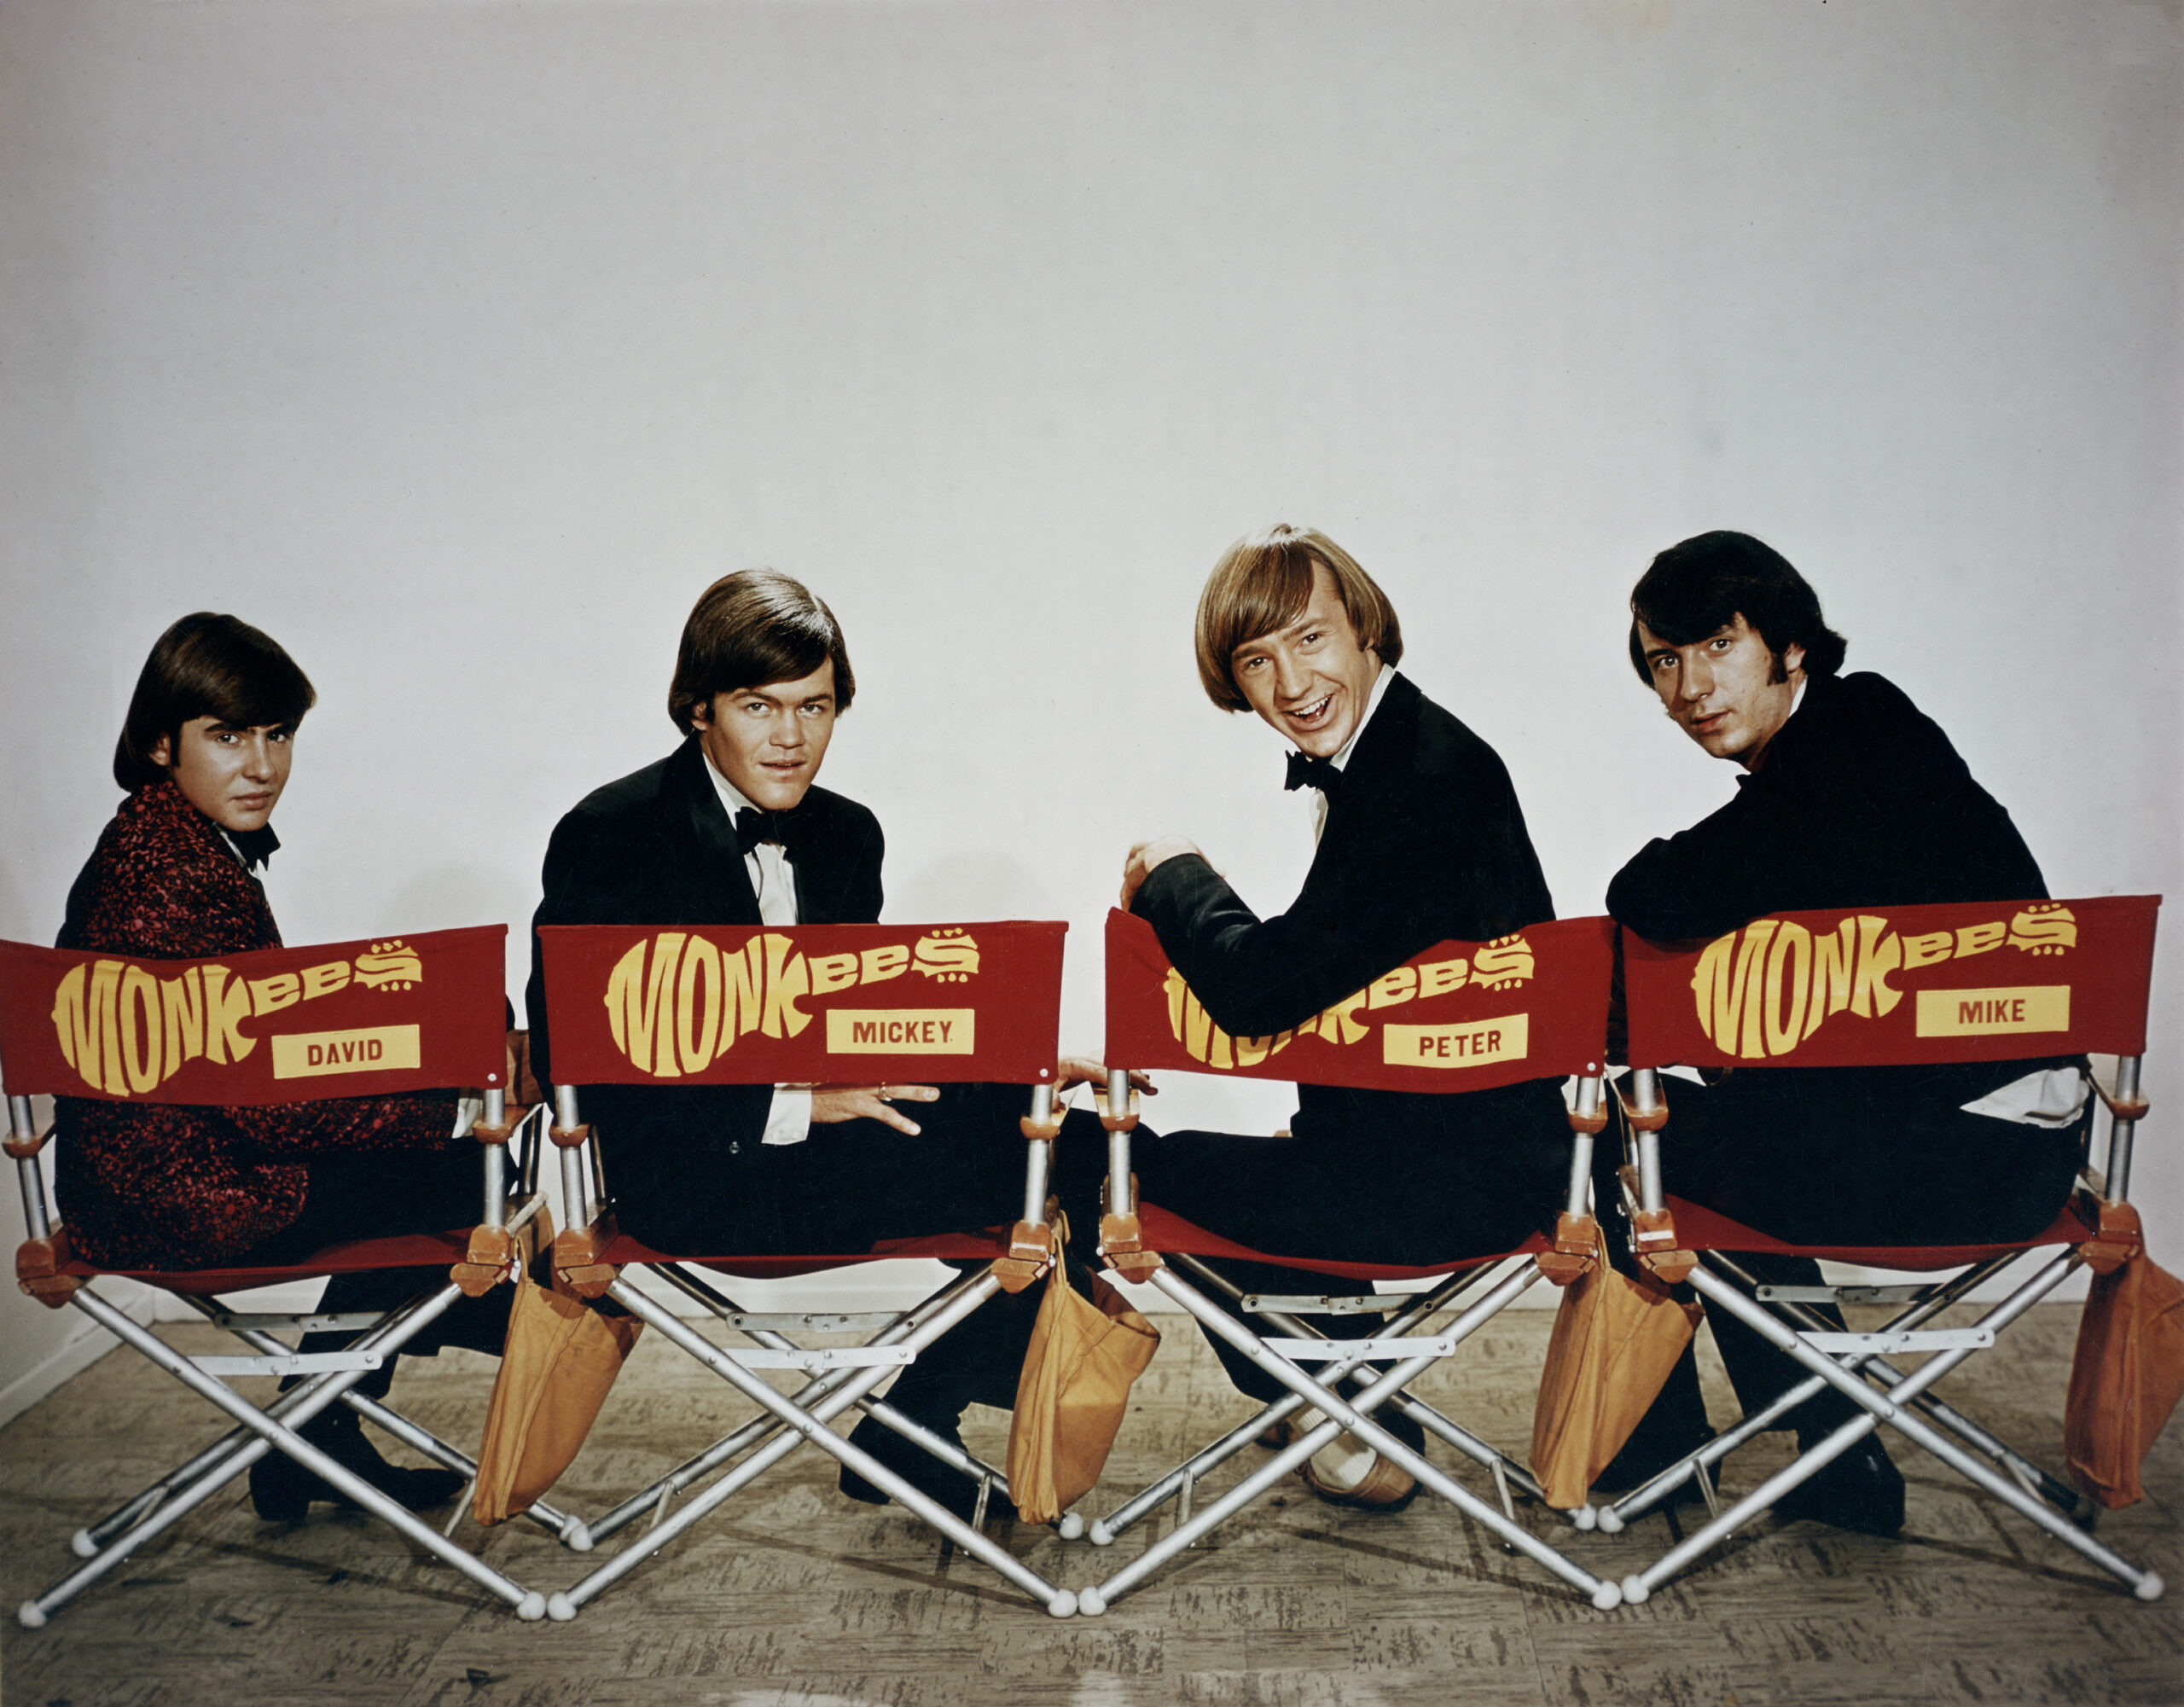 The Monkees sitting in directors chairs/ from left to right: Davy Jones, Micky Dolenz, Peter Tork, Mike Nesmith